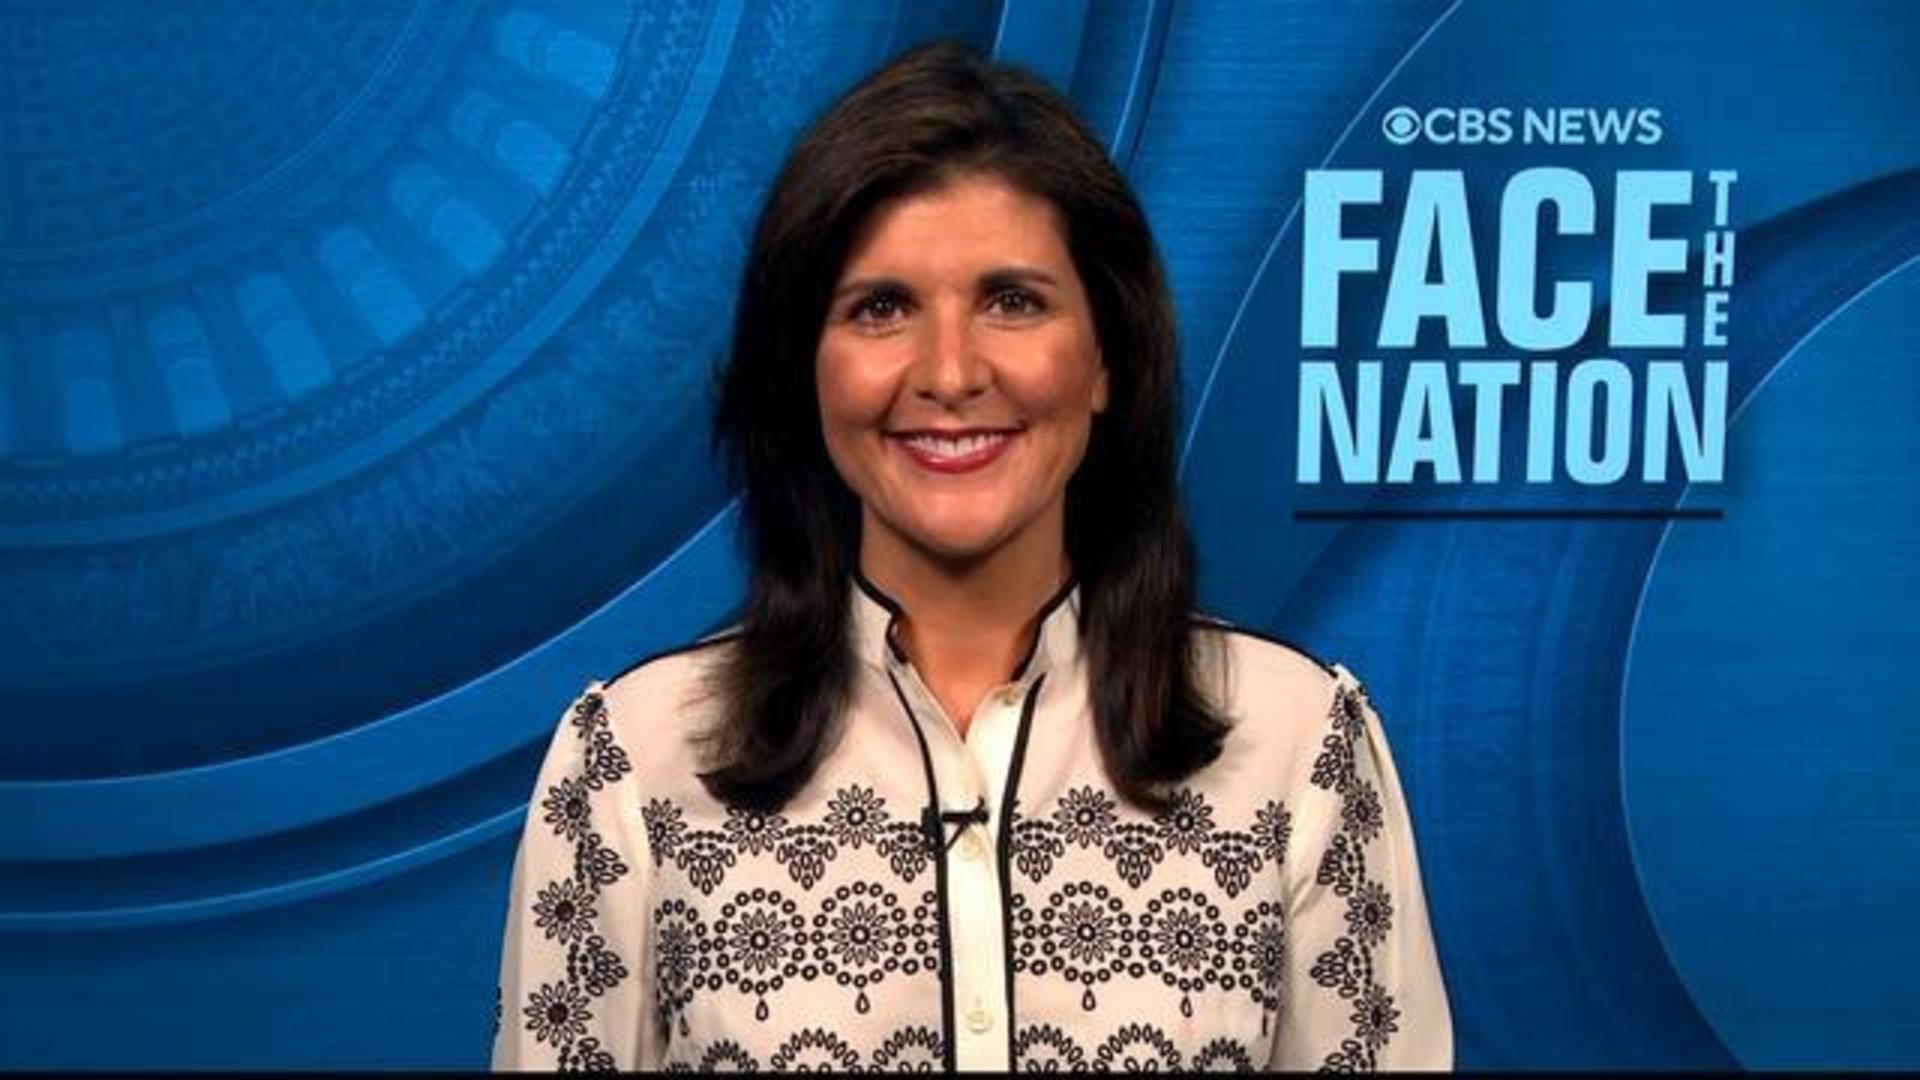 Nikki Haley says she is picture